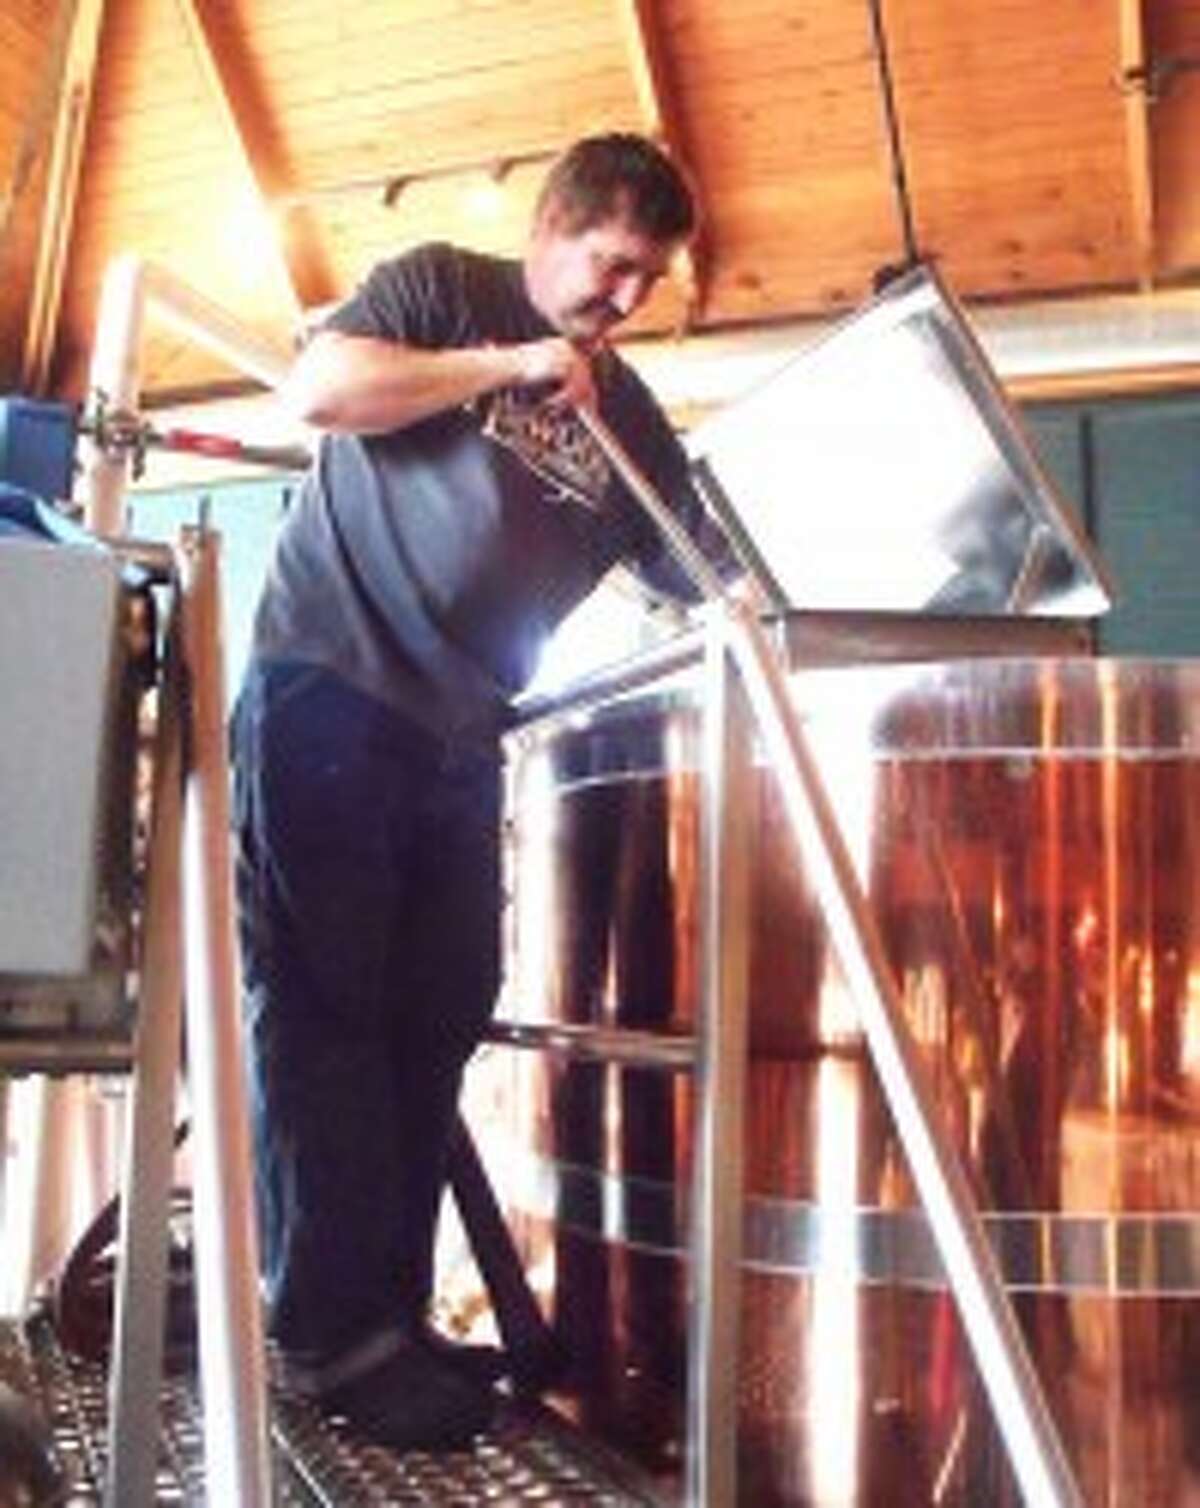 BREWMASTER: Steve (Konrad) Conner, head brewer at Redwood Brewing Company, stirs the mash as part of the preparation of a new batch of cream stout. Conner earned a silver medal in the Great American Beer Fest national competition for this brew. Below, Redwood Lodge proudly displaysw a banner hailing Conner’s success. (Herald Review photo Jim Crees)